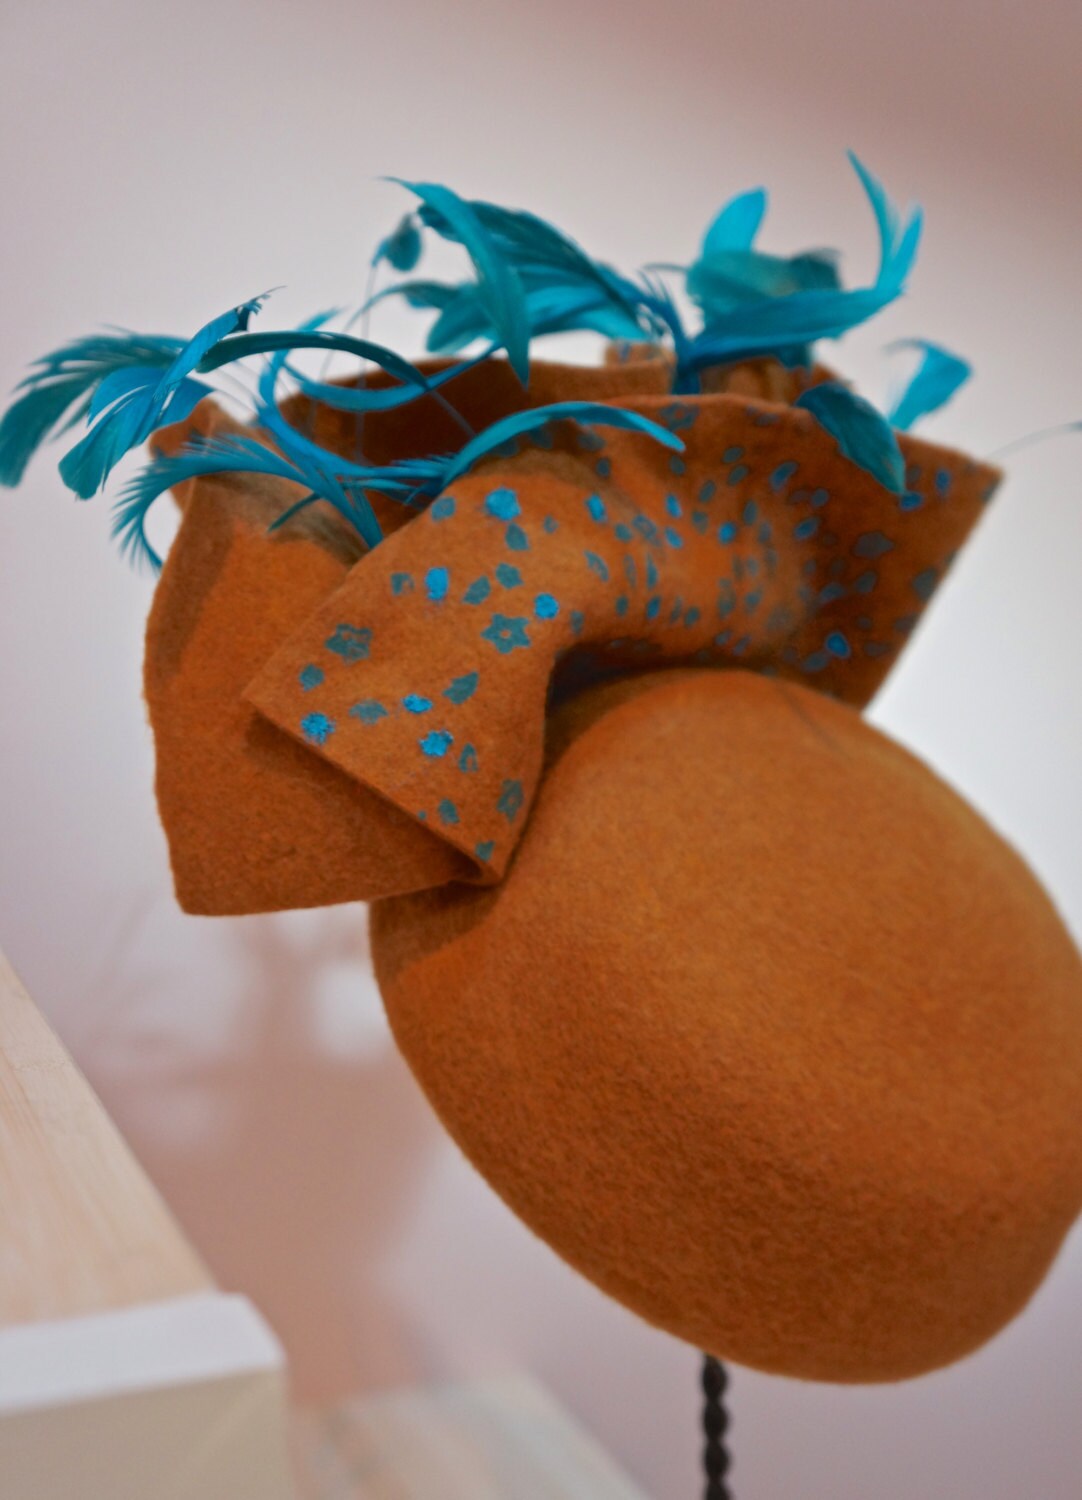 Rich Golden Amber Colored Wool Pill Box Hat-Turquoise Hand Painted embellishment-Turquoise Biot and Coque Feathers. Winter Races-Church Hat!